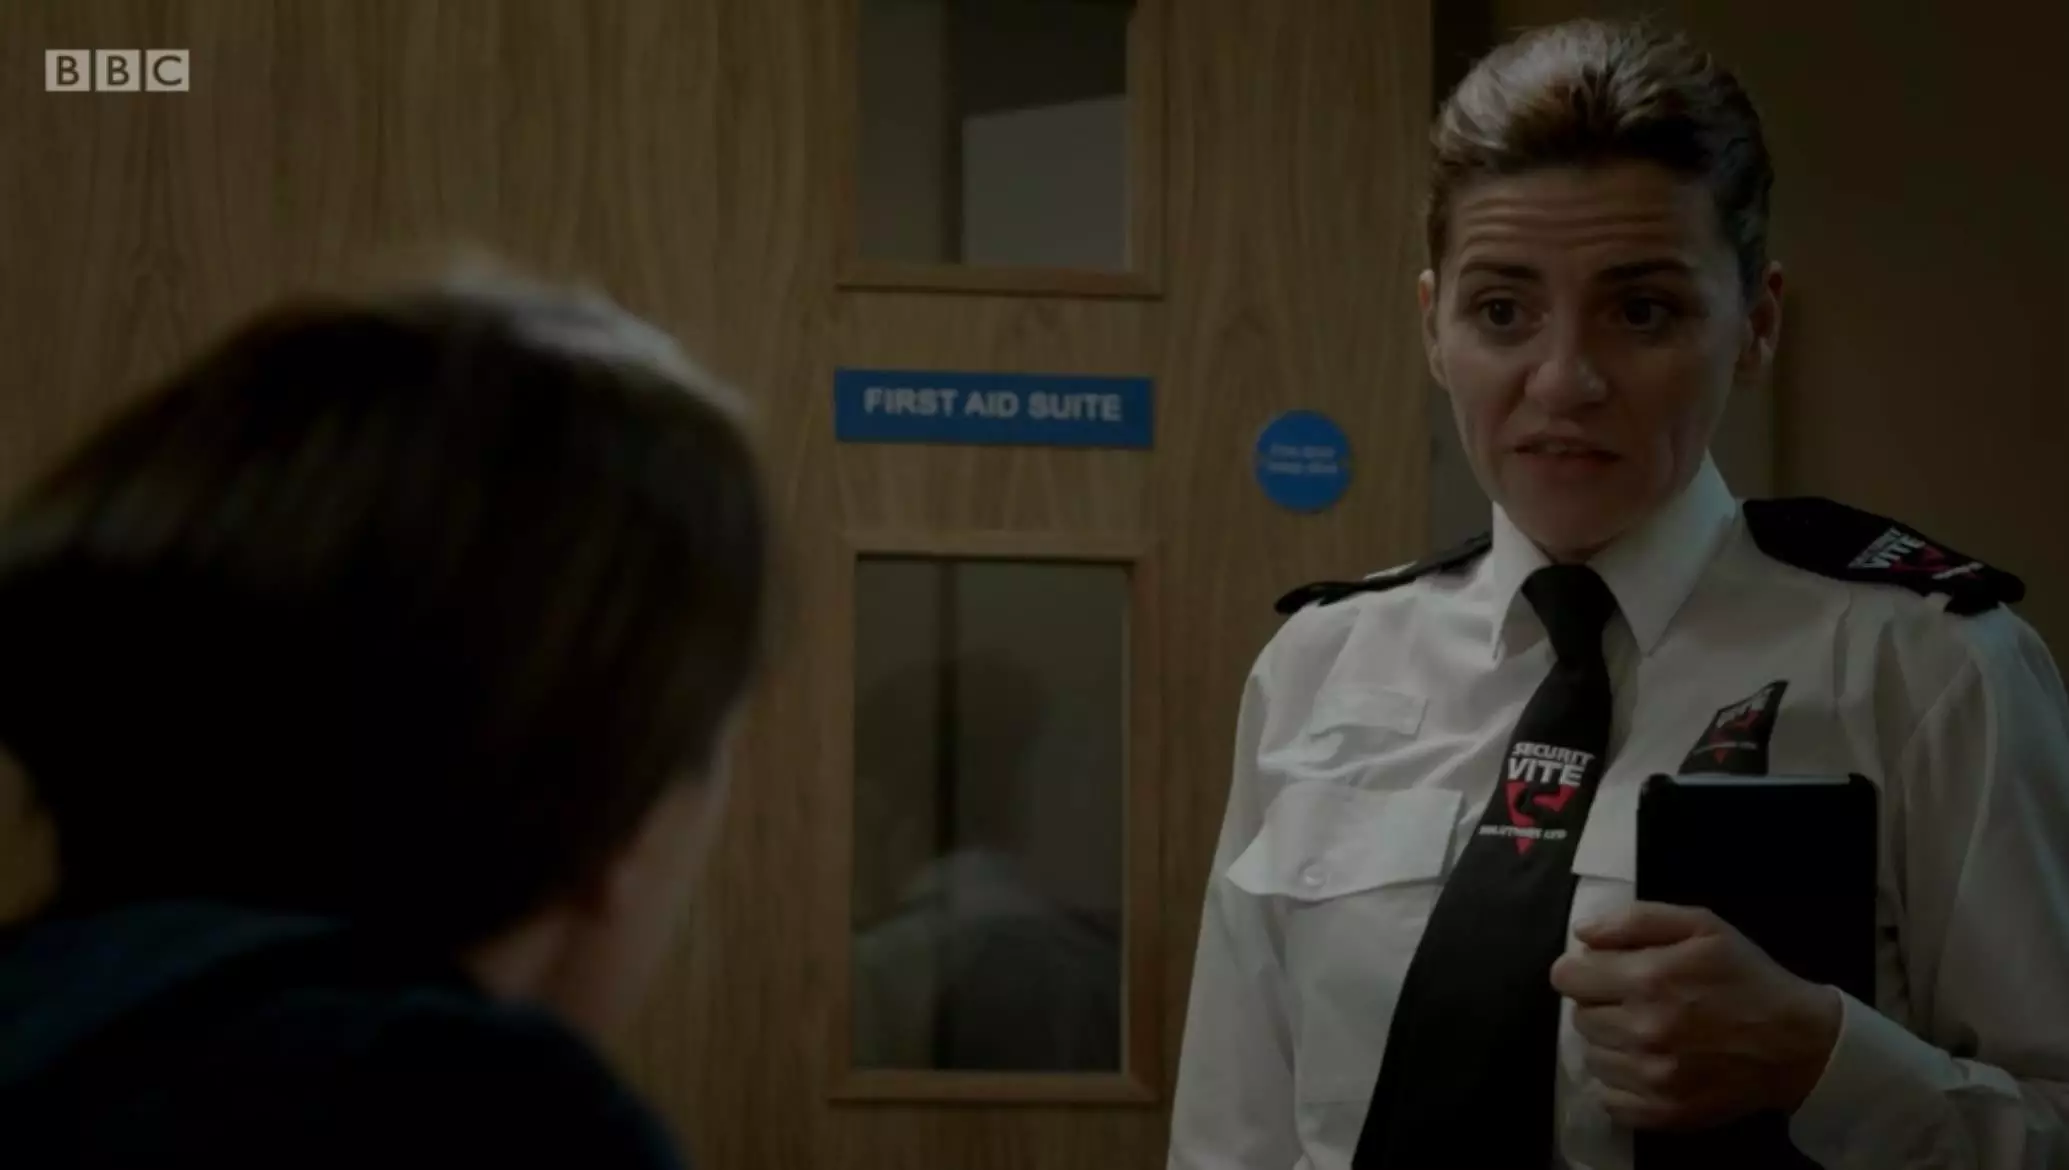 Fans were shocked to see the prison guard in the latest Line of Duty episode (